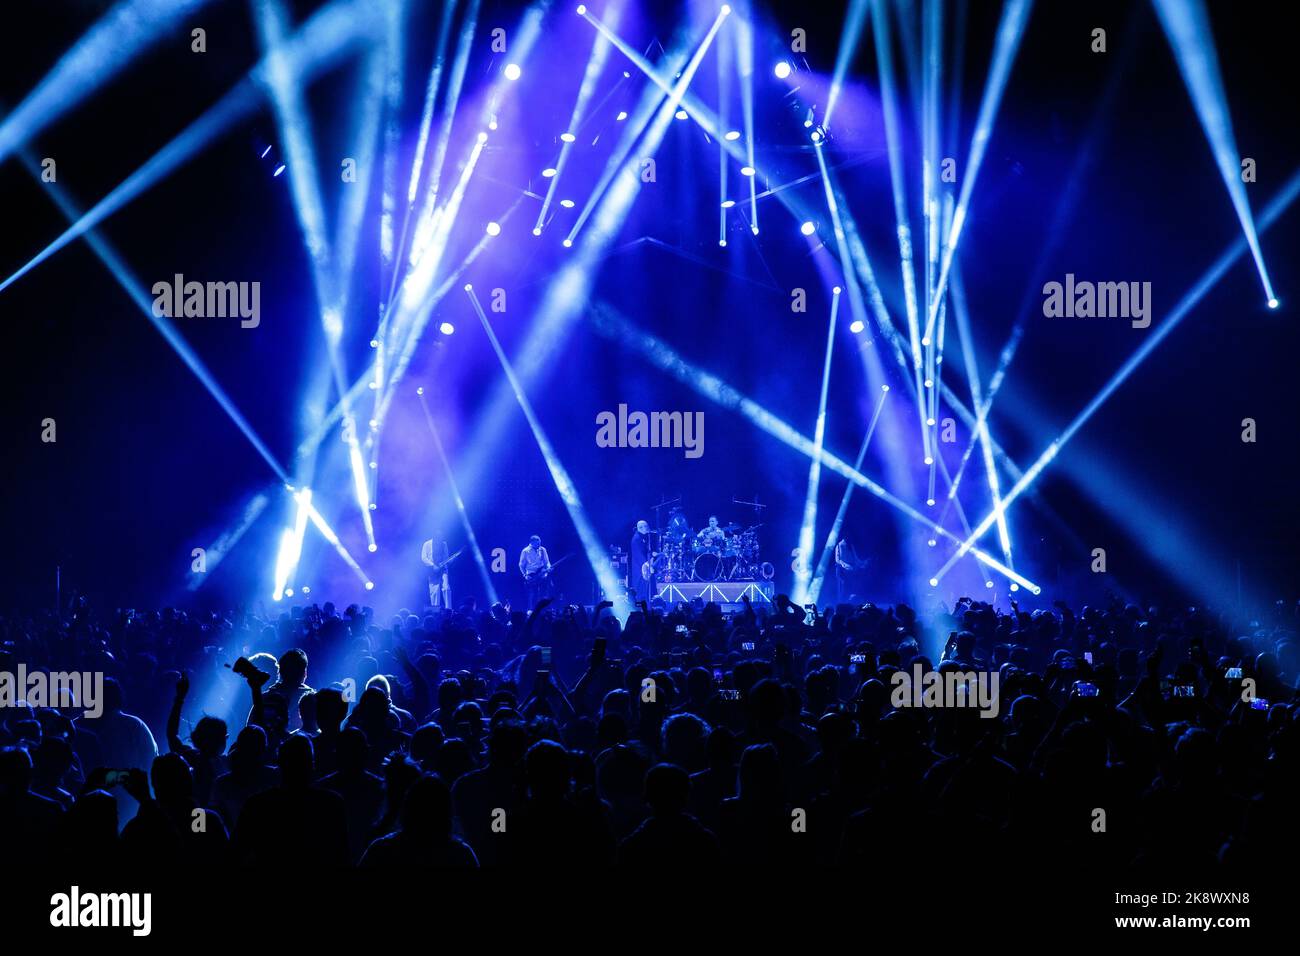 Toronto, Canada. 24/10/2022, Smashing Pumpkins perform on stage in front of a large crowd with multiple white lights Stock Photo